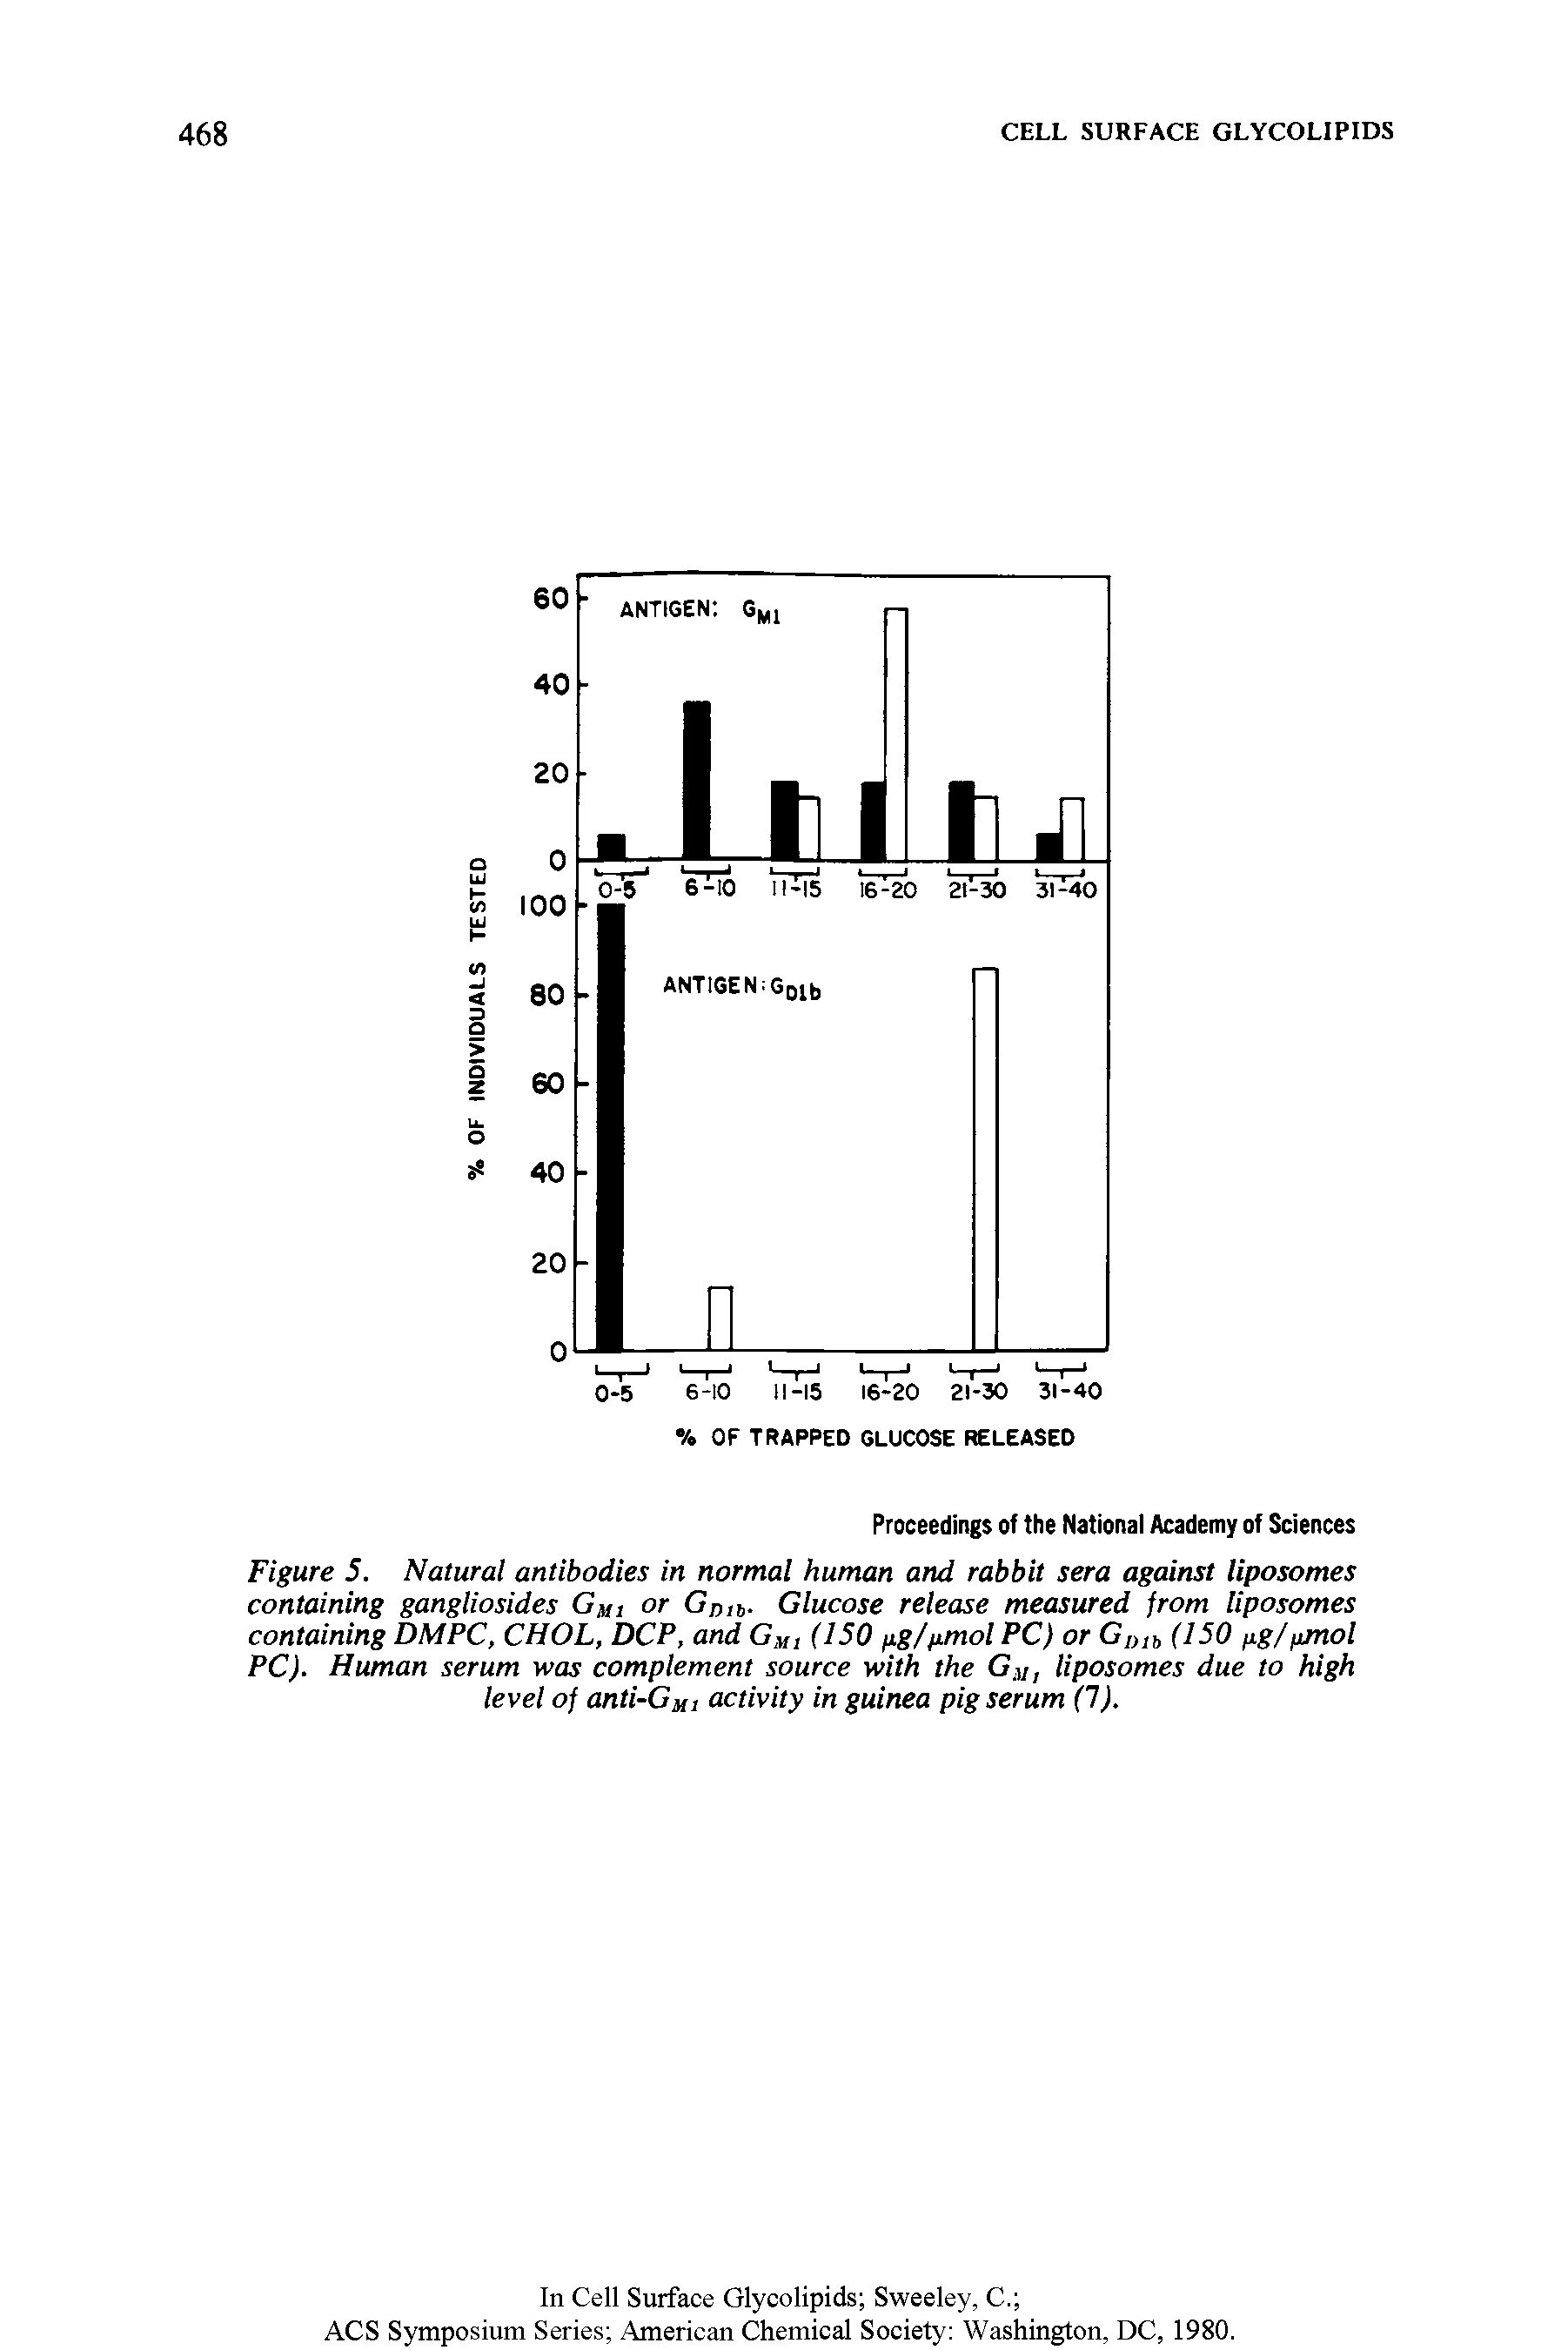 Figure 5. Natural antibodies in normal human and rabbit sera against liposomes containing gangliosides GM1 or Gntb. Glucose release measured from liposomes containing DMPC, CHOL, DCP, and GM, (150 /lg/fimol PC) or G,)tb (150 fig/p/riol PC). Human serum was complement source with the GM, liposomes due to high level of anti-Gui activity in guinea pig serum (1).